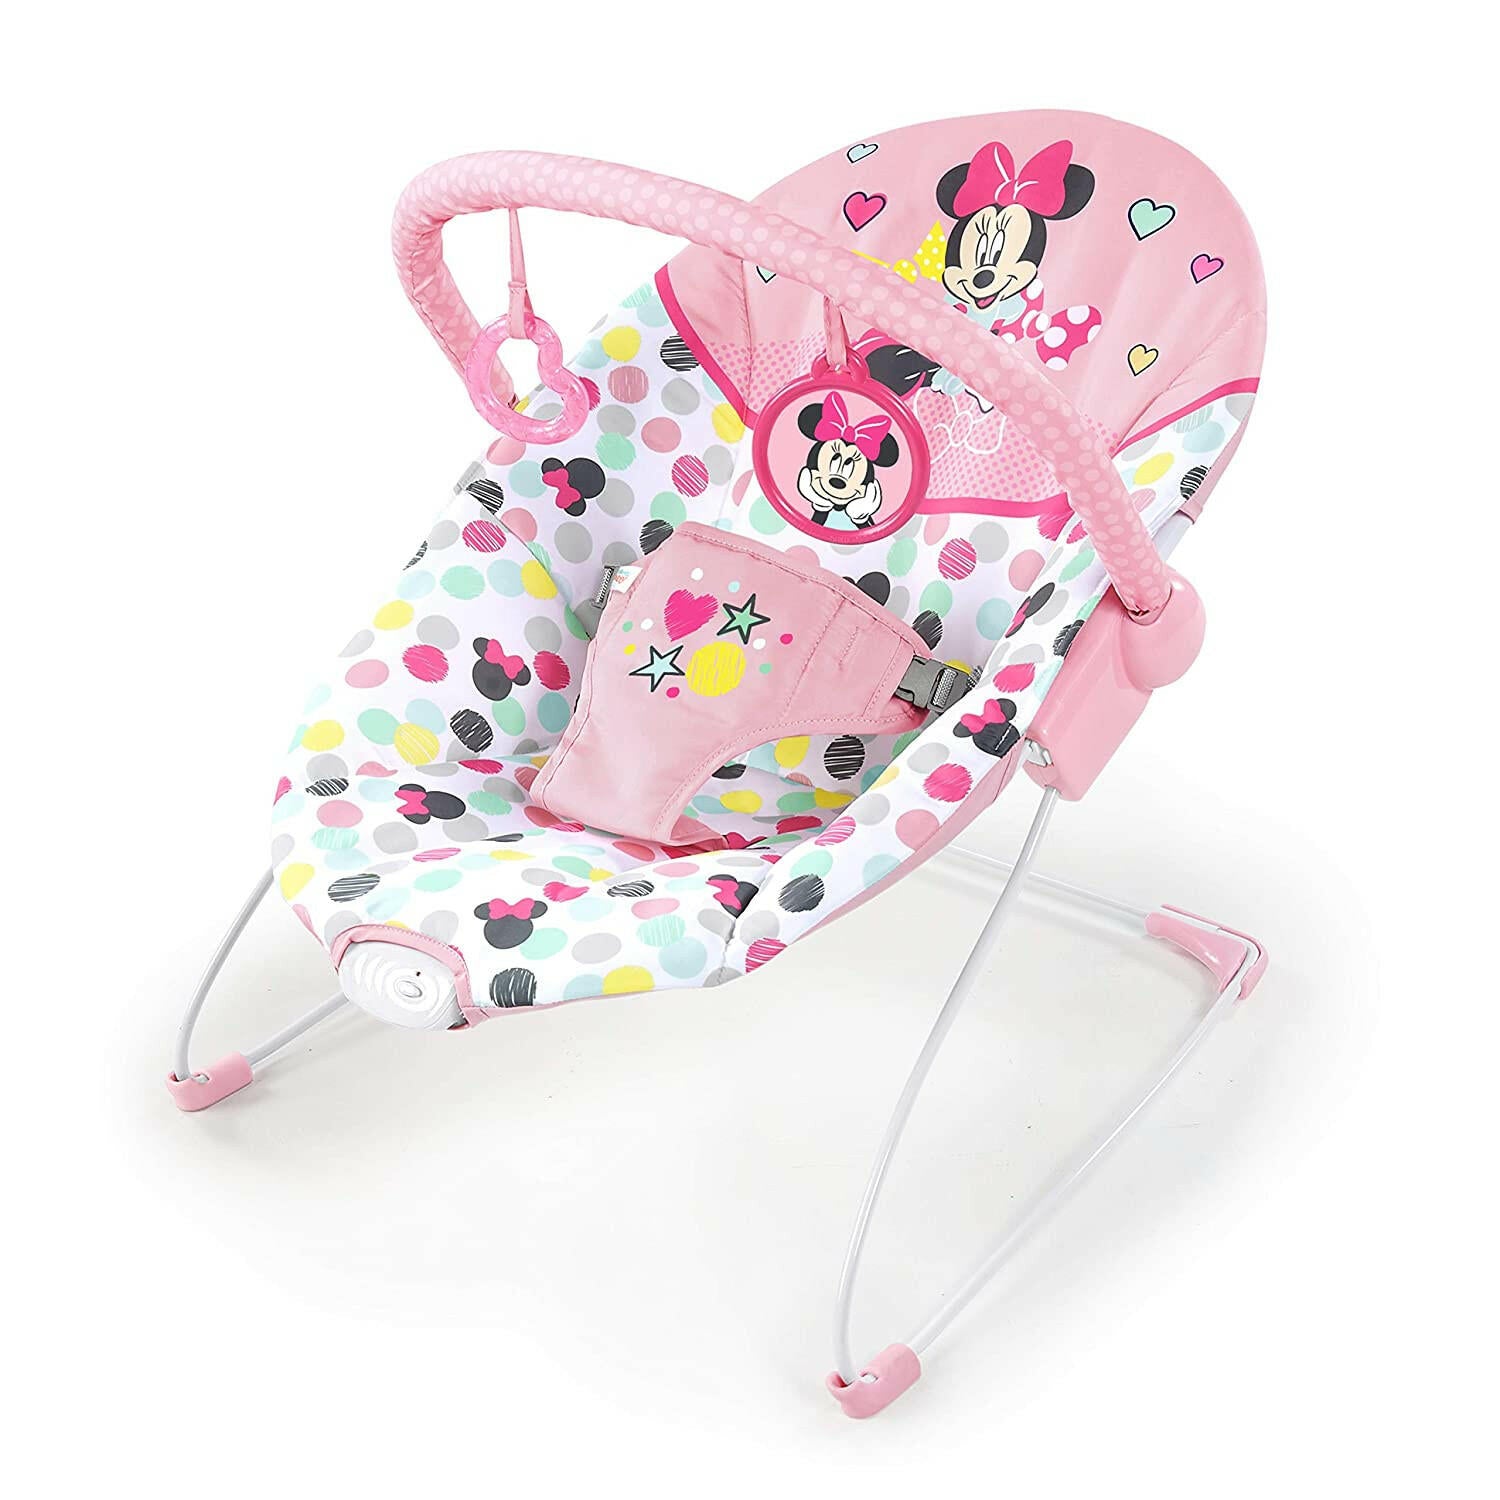 Disney Baby Minnie Mouse Vibrating Bouncer with Toy bar.